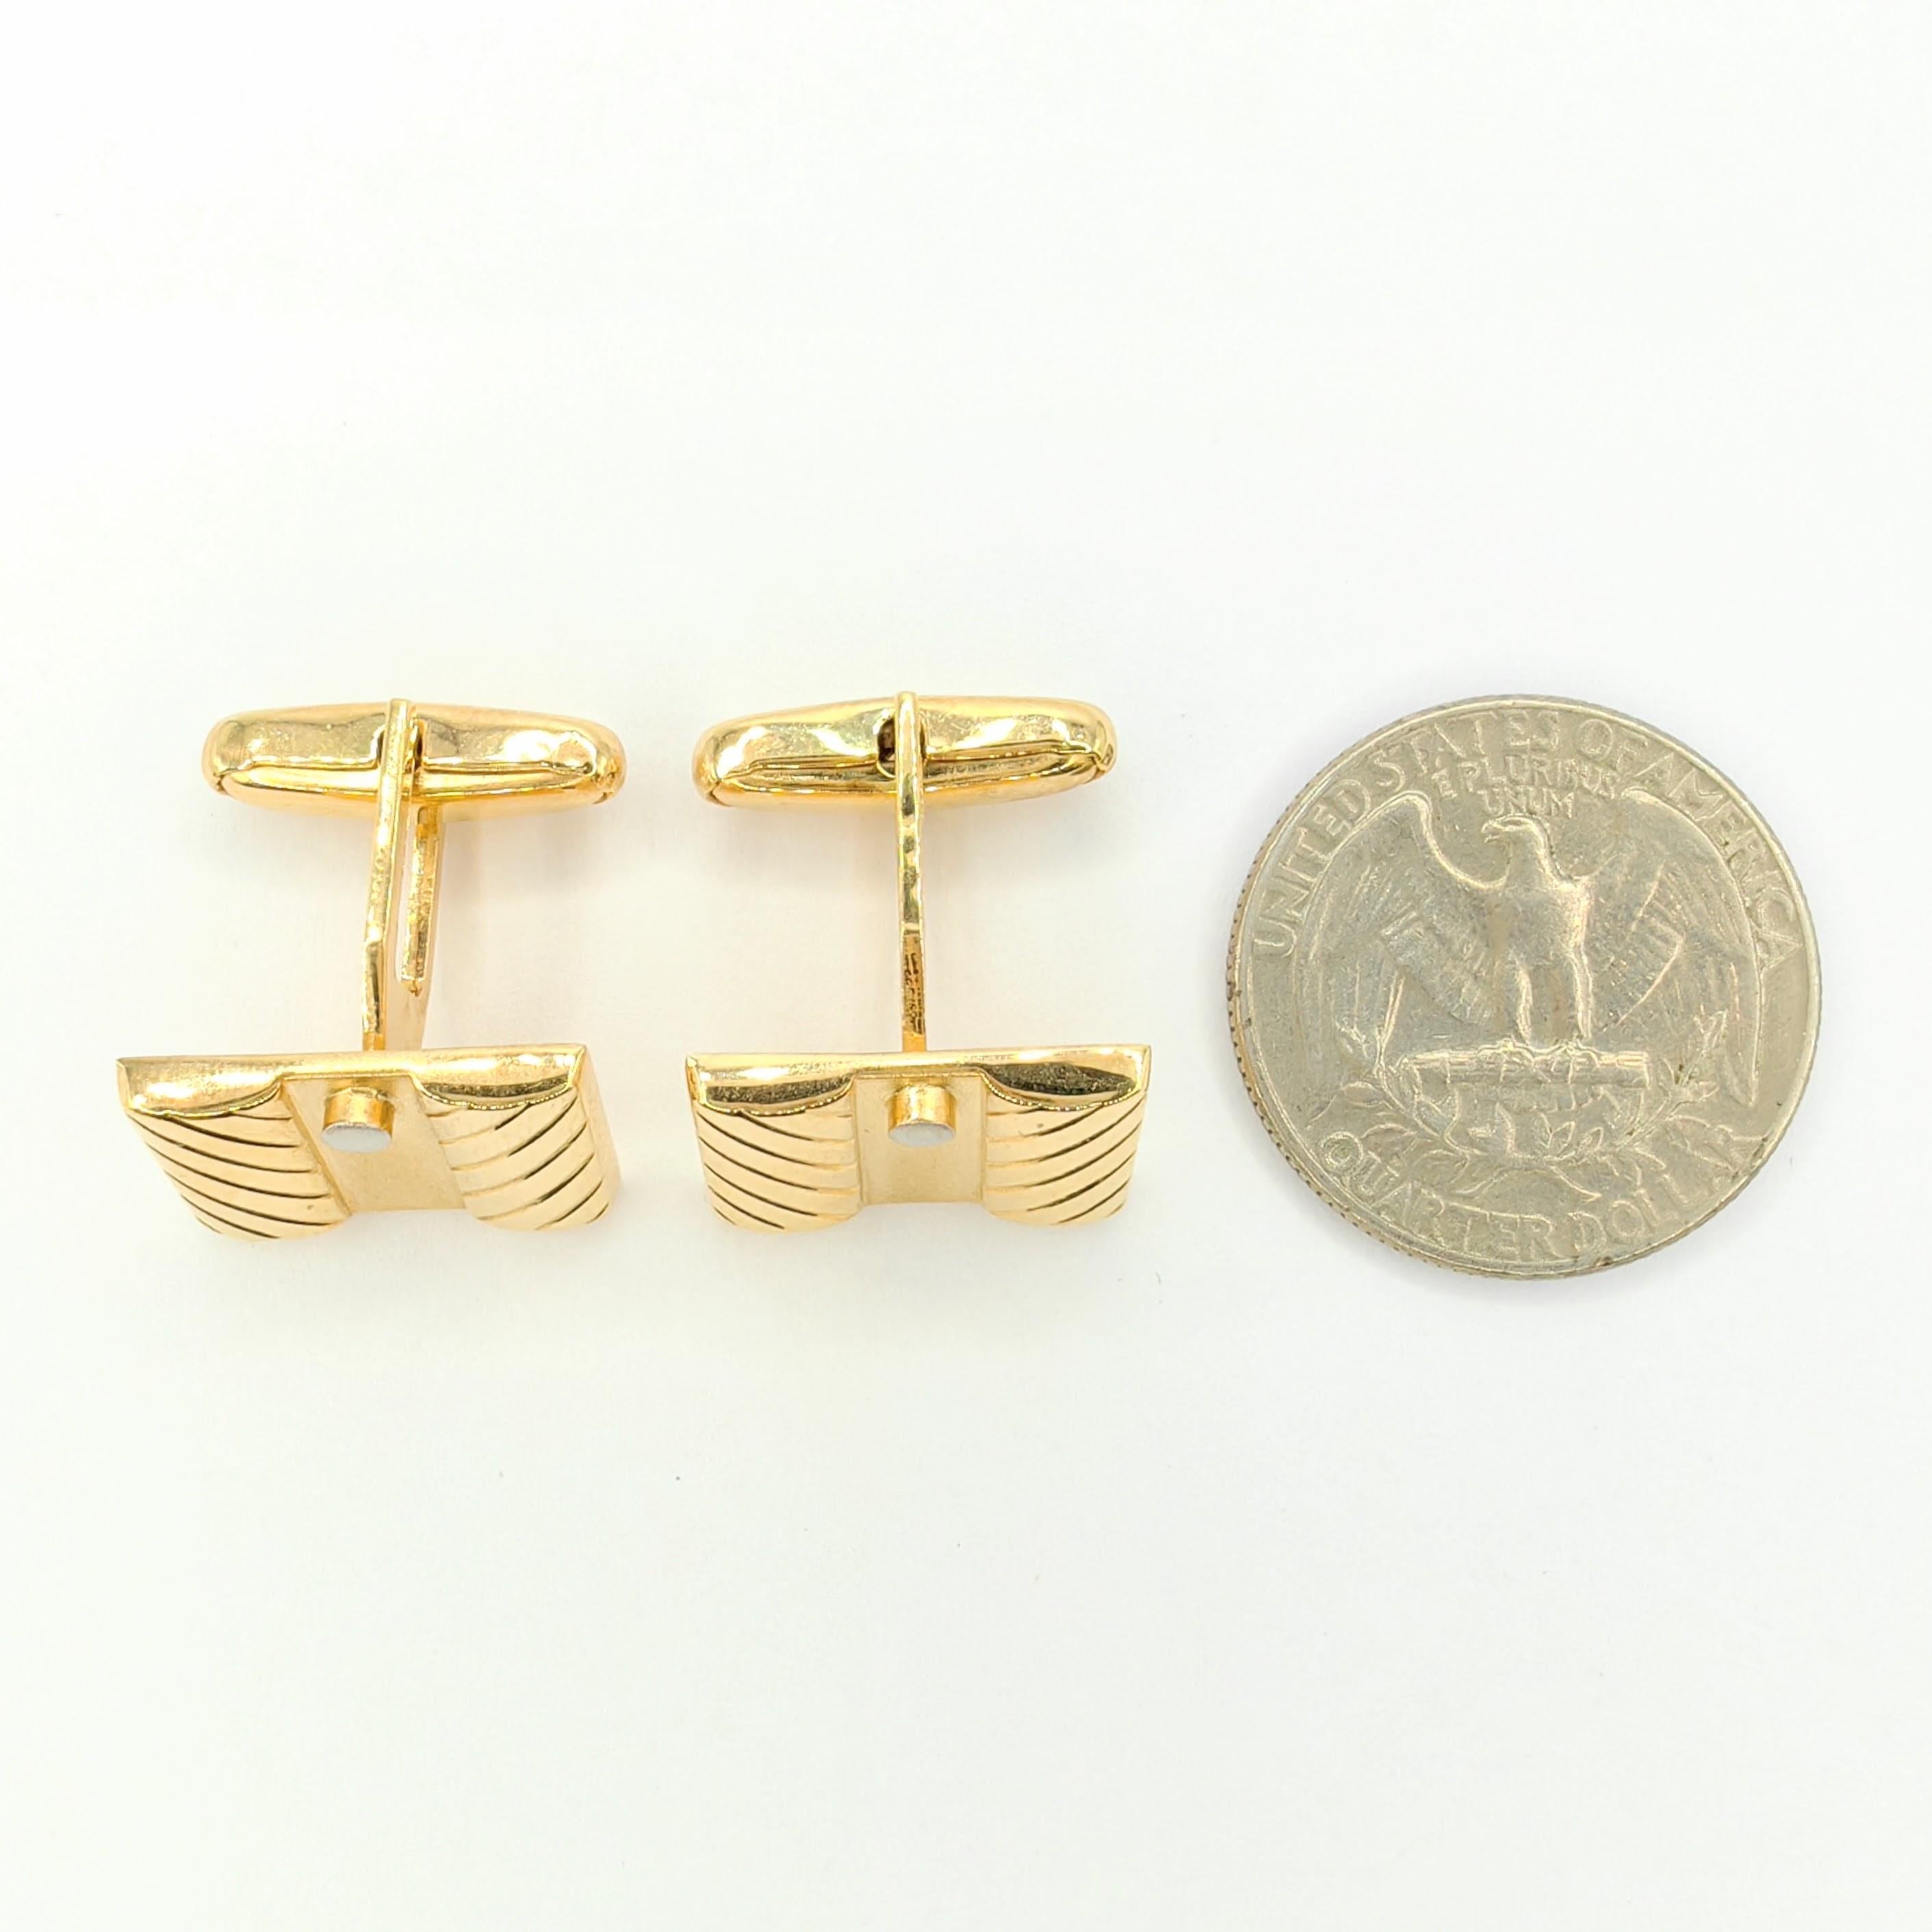 Vintage Geometric Design Cufflinks in 18K Yellow & White Two-tone Gold 4